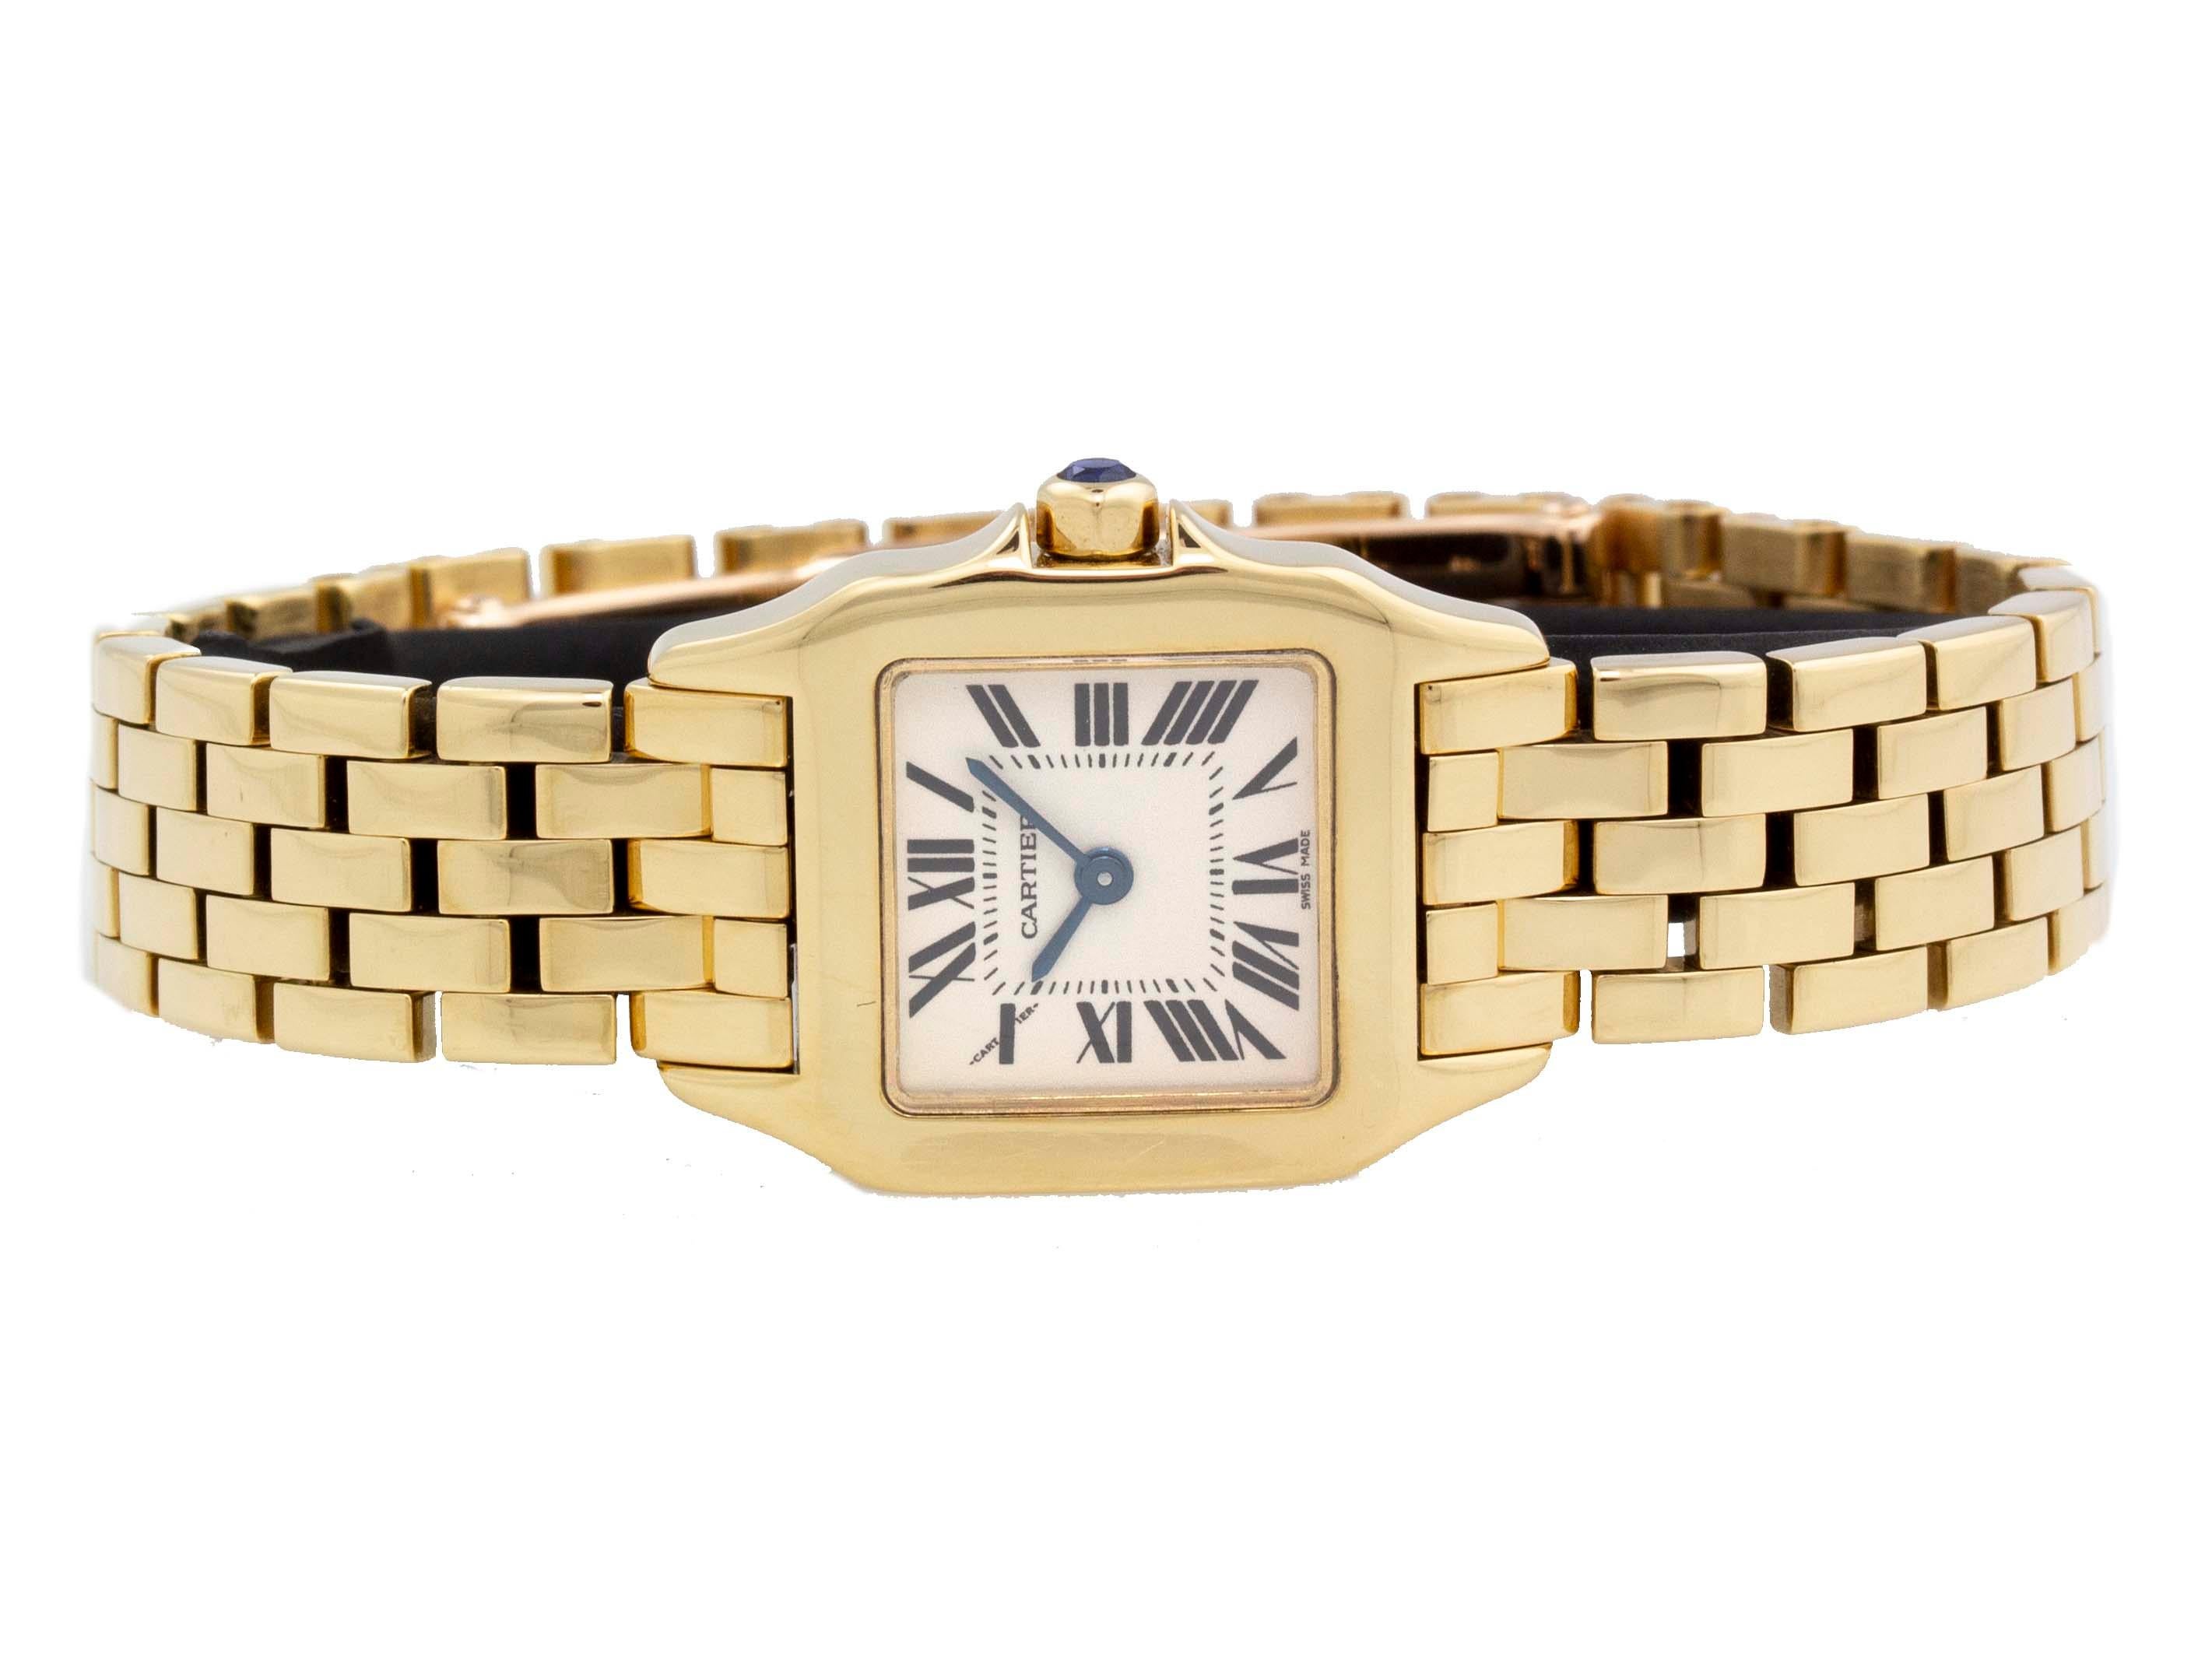 Brand	Cartier
Series	Santos Demoiselle
Model	W25063X9
Gender	Ladies
Condition	Great Condition Pre-owned, Light Scratches Throughout
Material	18k Yellow Gold
Finish	Polished
Caseback	Solid
Diameter	21mm
Thickness	 
Bezel	Fixed, 18k Yellow